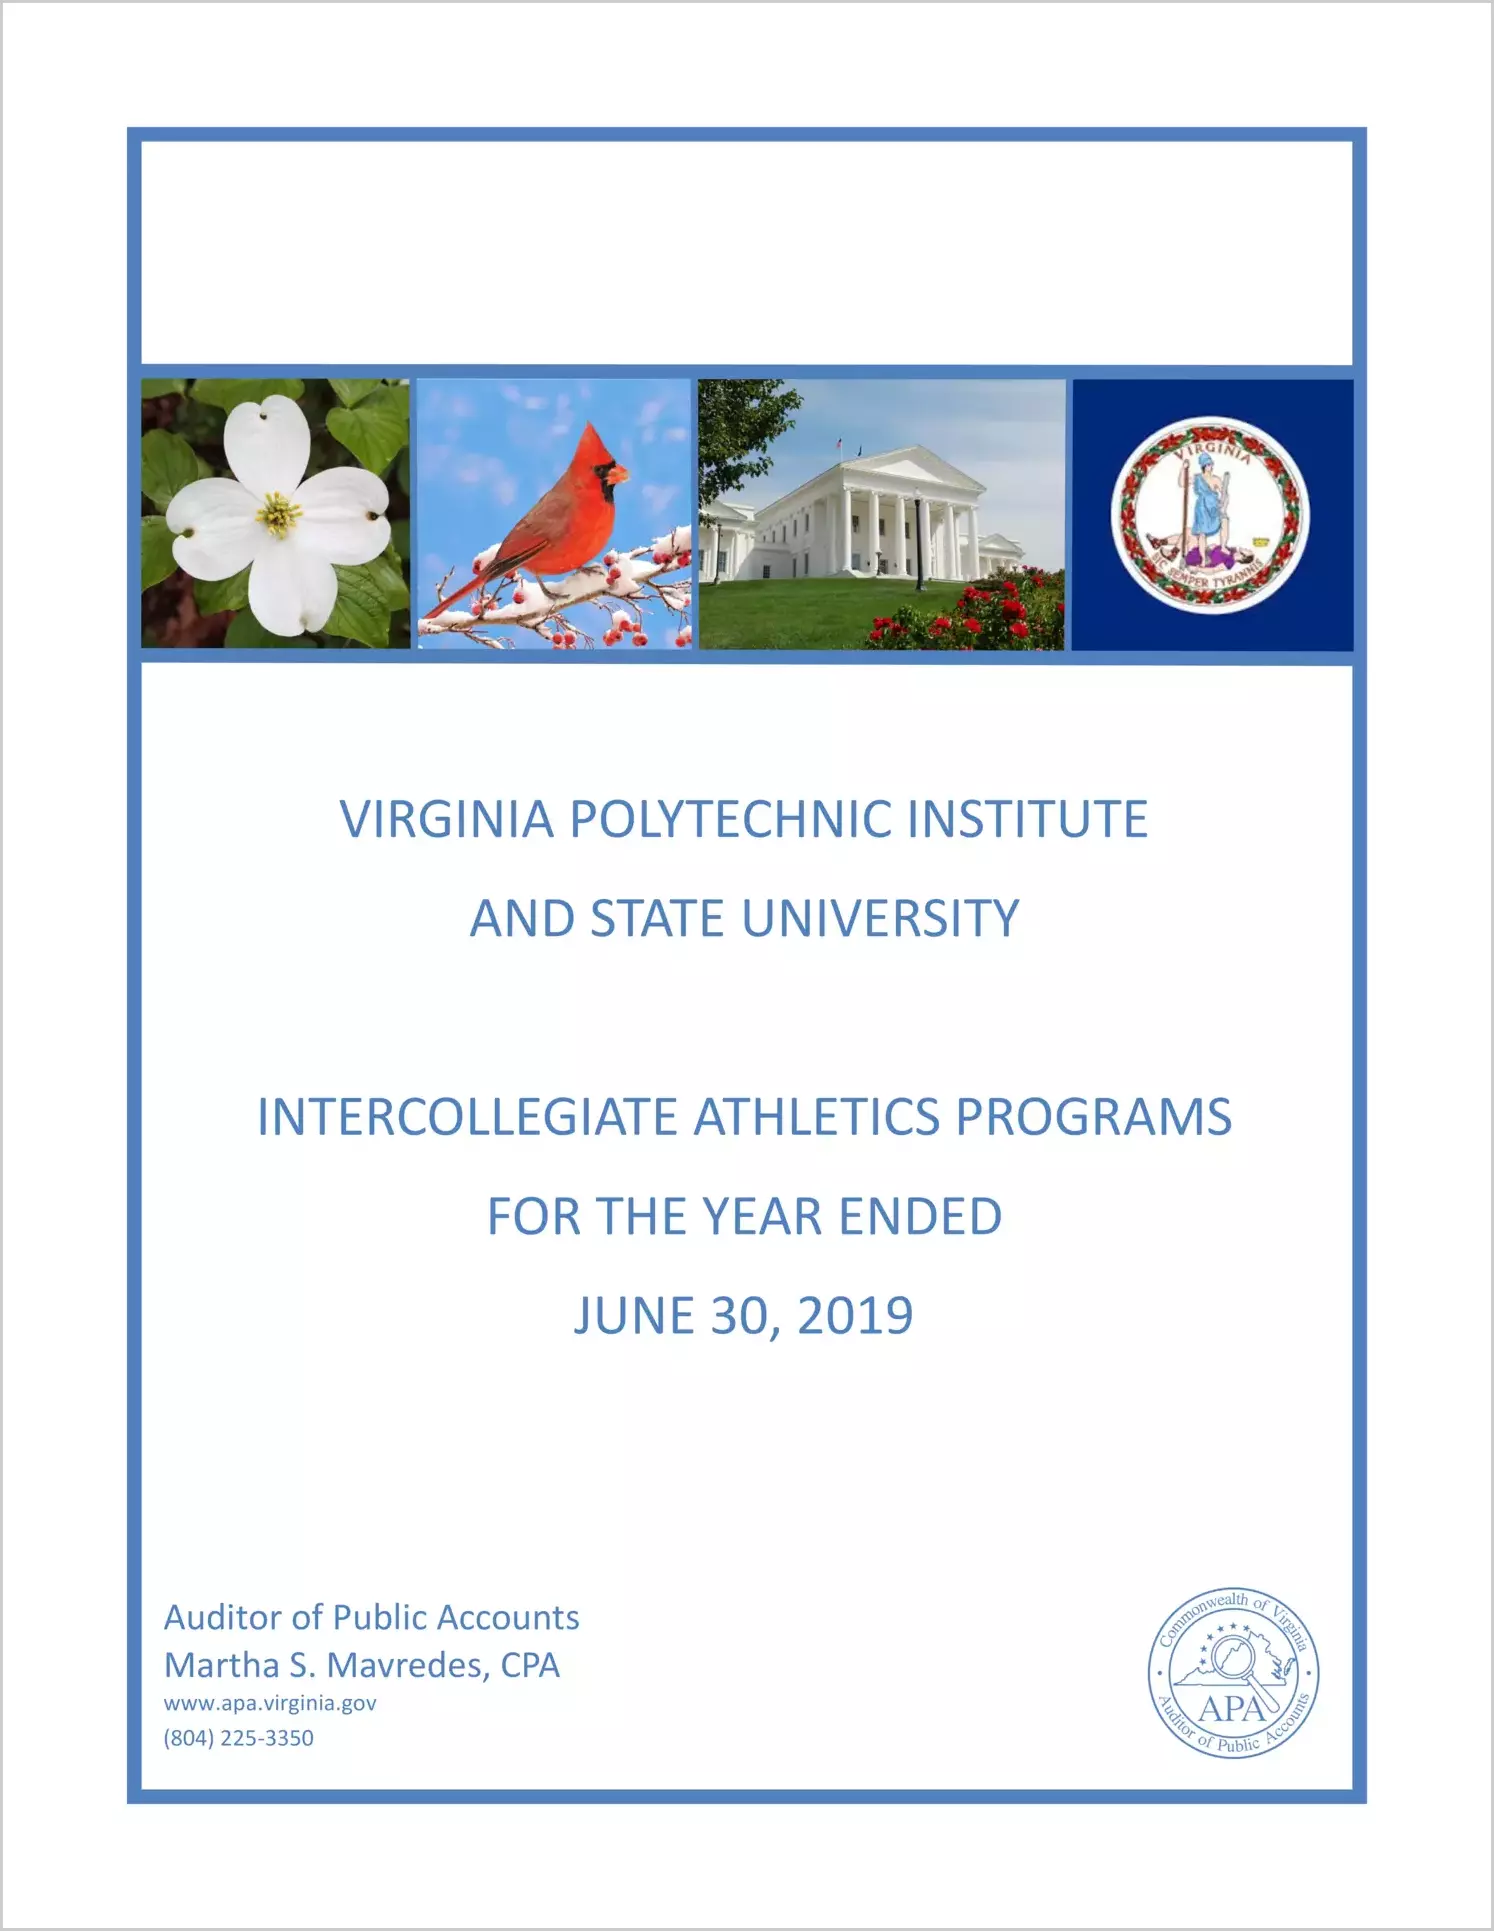 Virginia Polytechnic Institute and State University Intercollegiate Athletics Programs for the year ended June 30, 2019